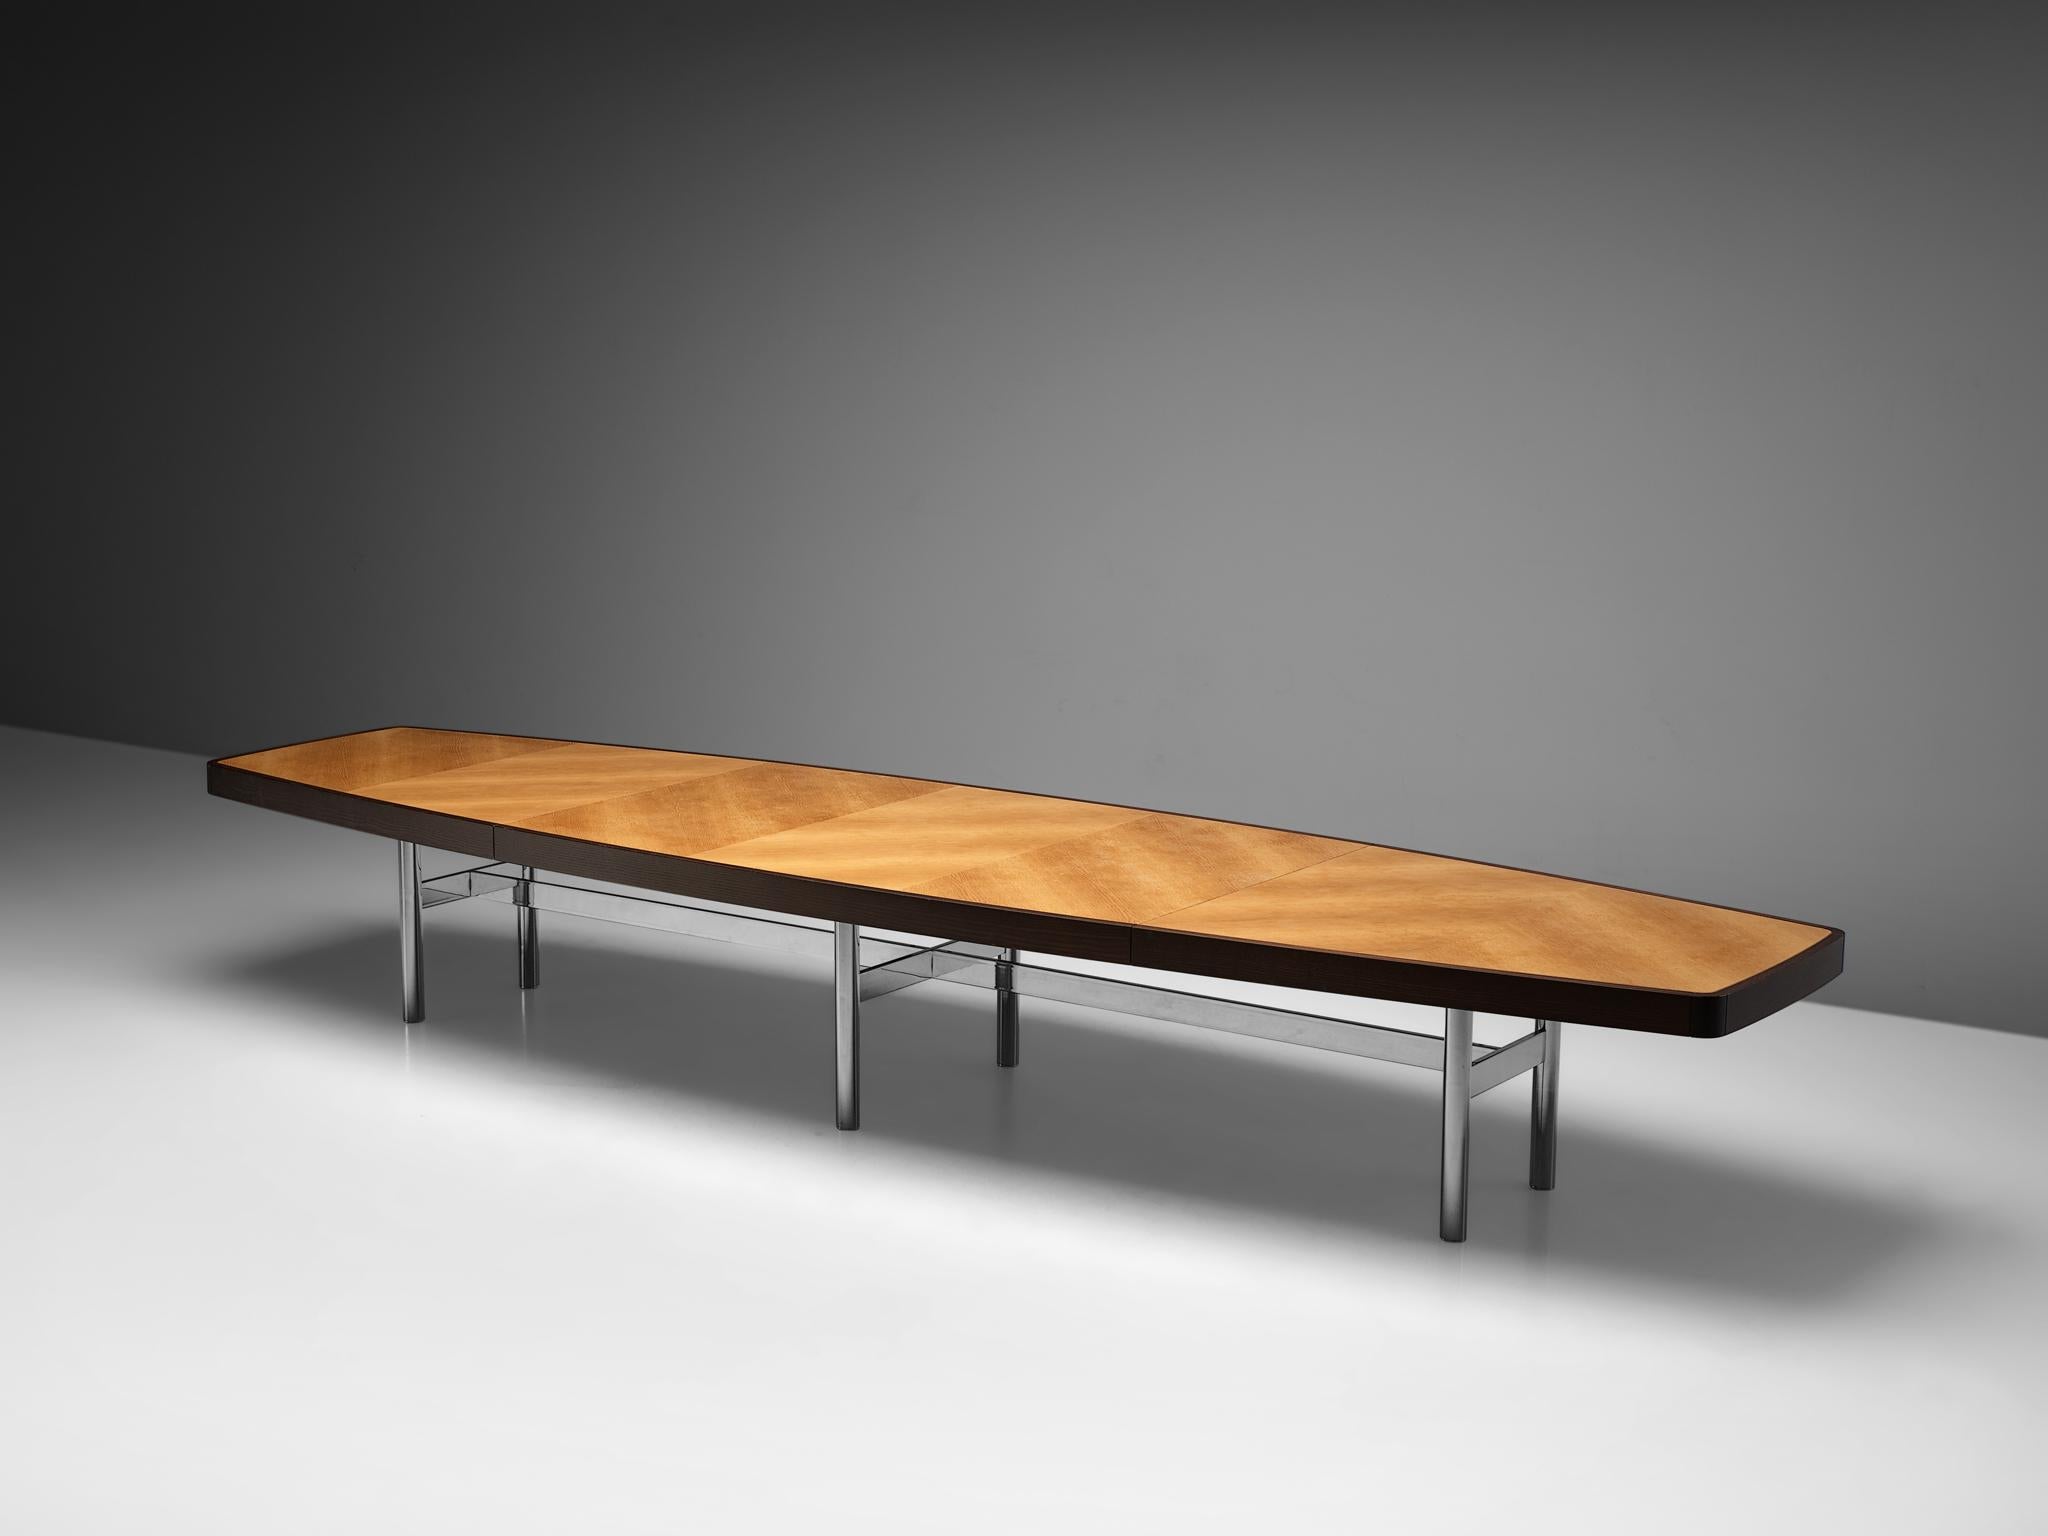 Boat shaped conference table, metal and beech, France, 1970s

This large boat or barrel shaped table is designed in a modernist, simplistic style. The table is robust and strong and has six steel legs that support the top. The thick tabletop has a